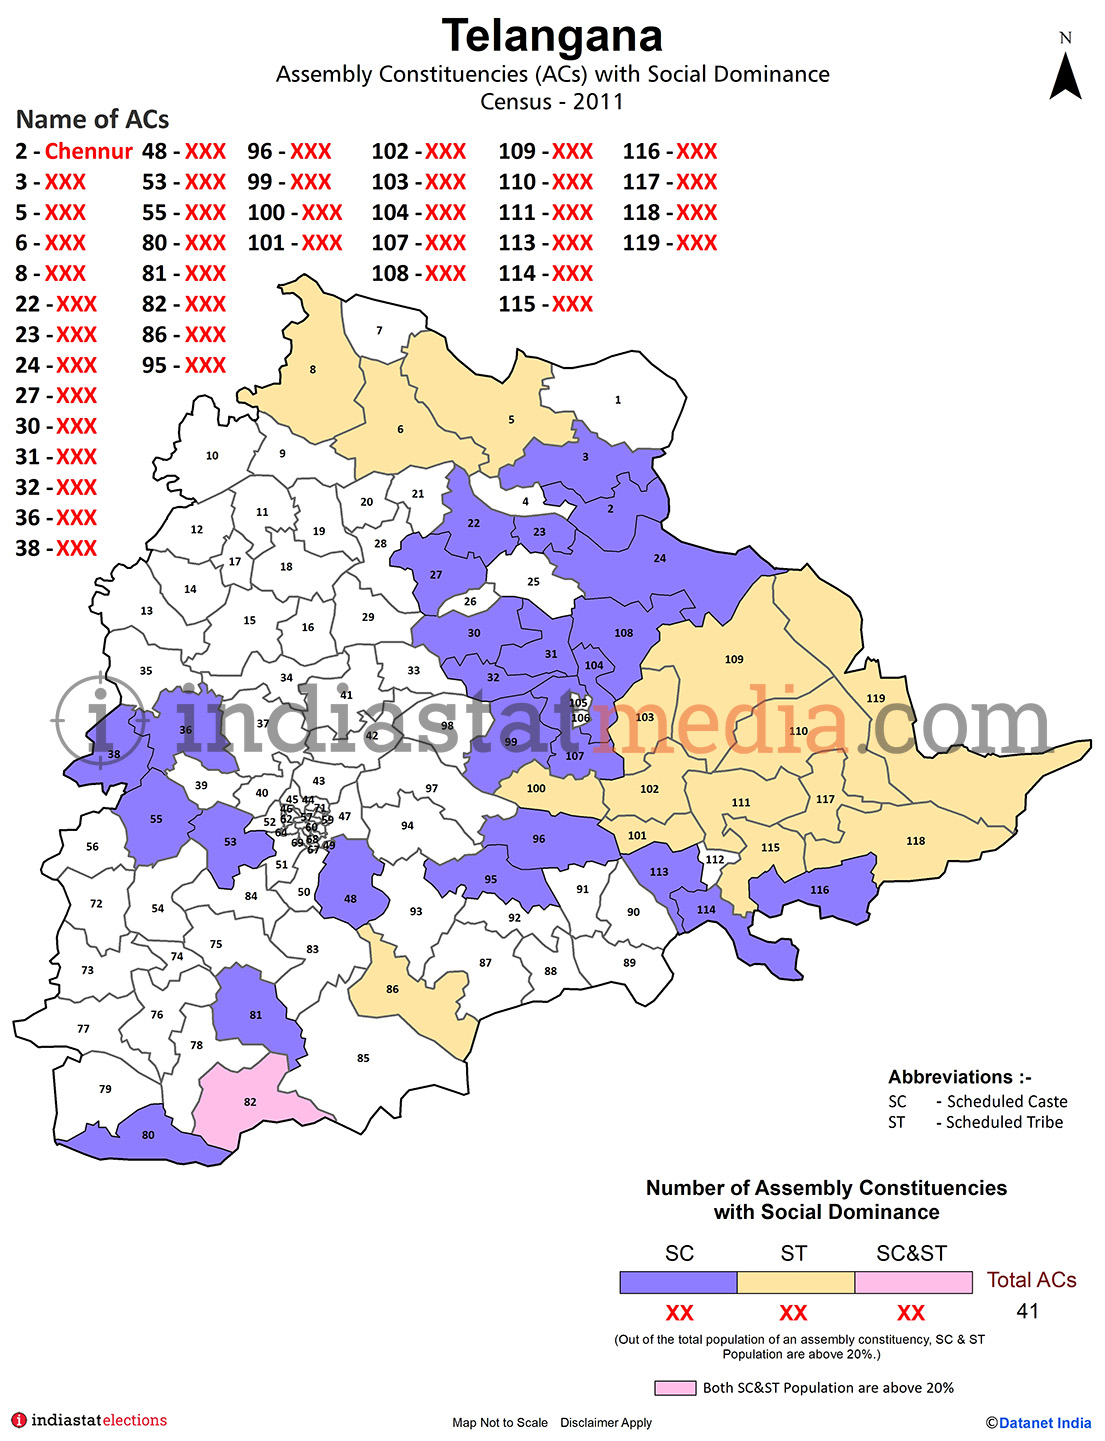 Assembly Constituencies with Social Dominance in Telangana - Census 2011